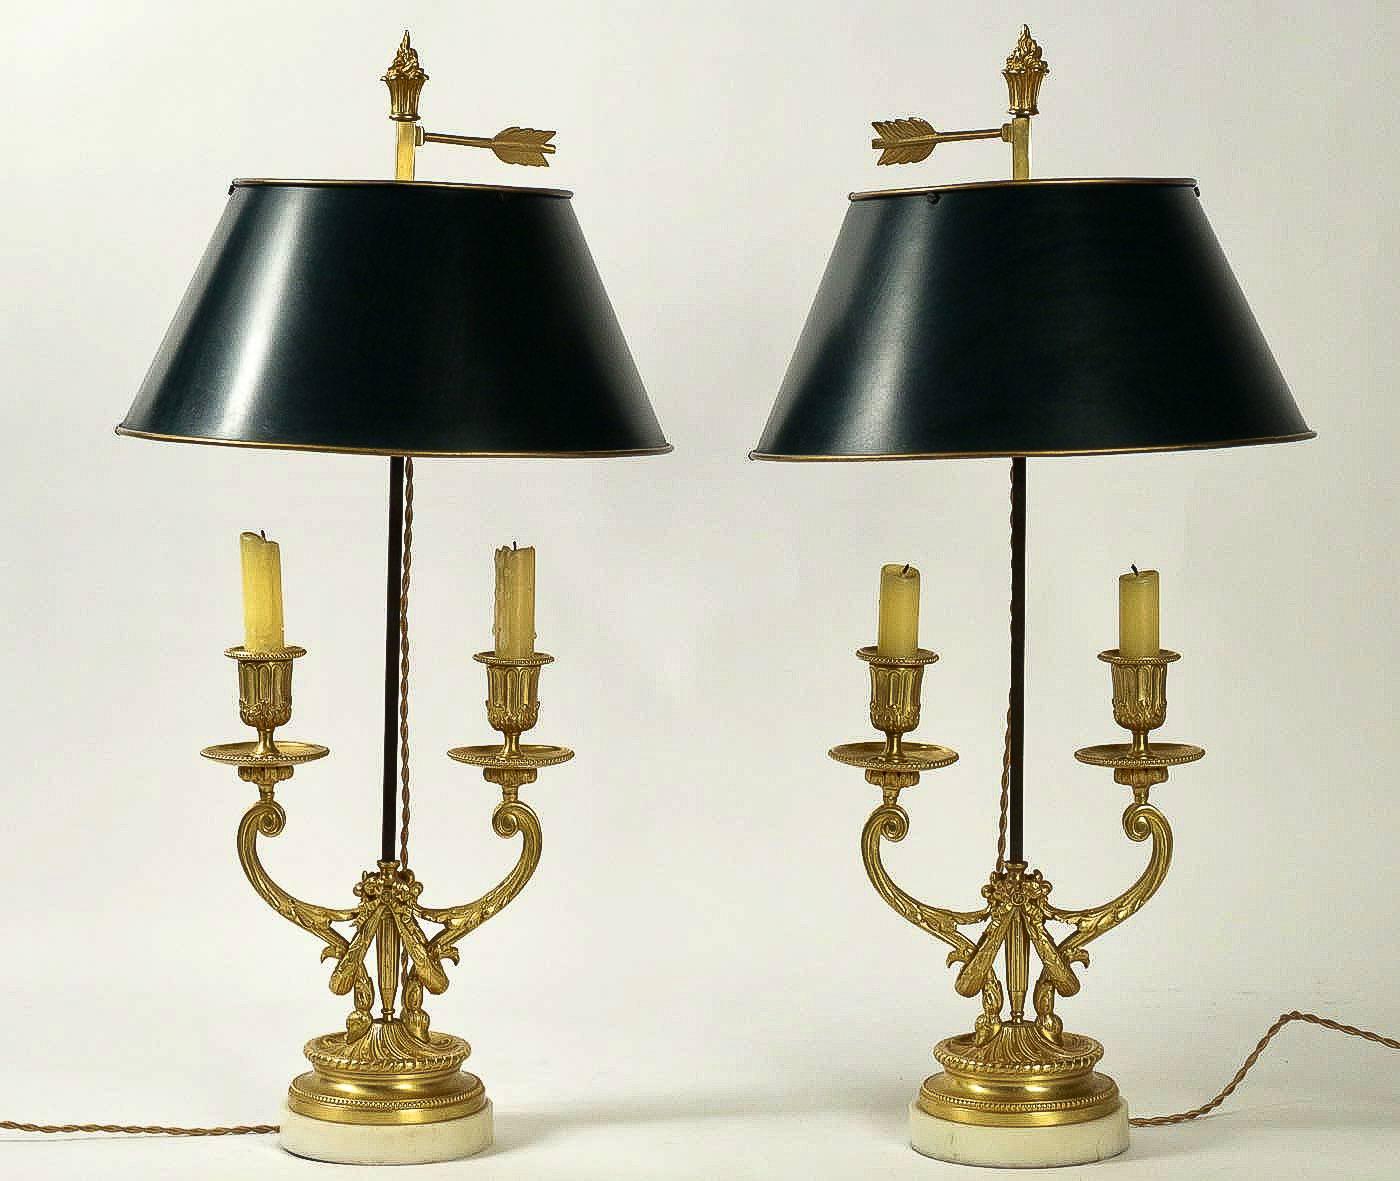 We are pleased to present you, a beautiful French Louis XVI style gilt bronze two-light candelabra rest on a circular bases in white Carrara marble, converted to table Bouillote lamps with a new metal shades. 

Our Bouillote lamps are in perfect